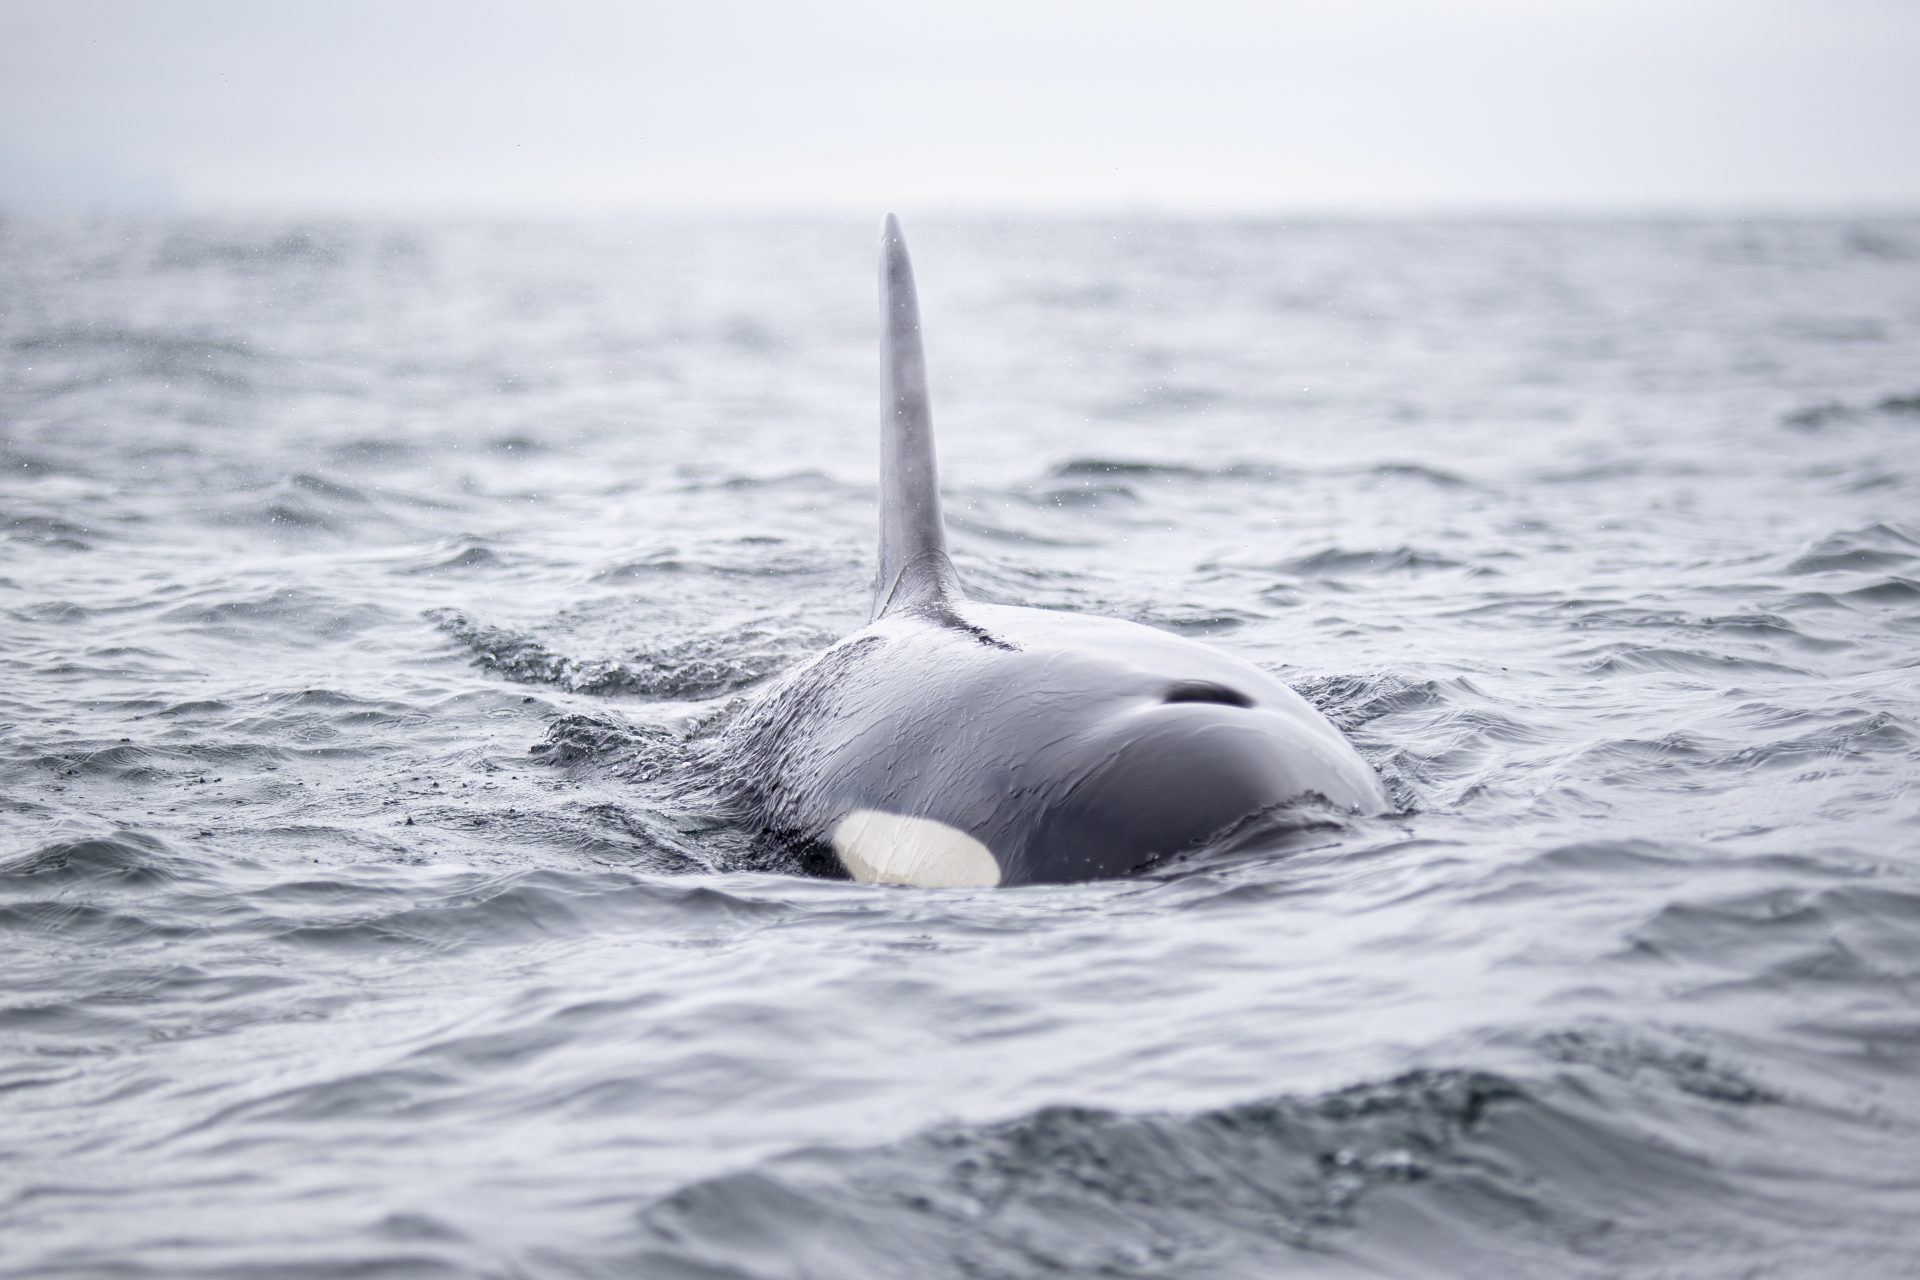 The perfect shot of the Orca blowhole close at sea. Be an ORCA Sound is everything. photo by Piet van den Bemd©